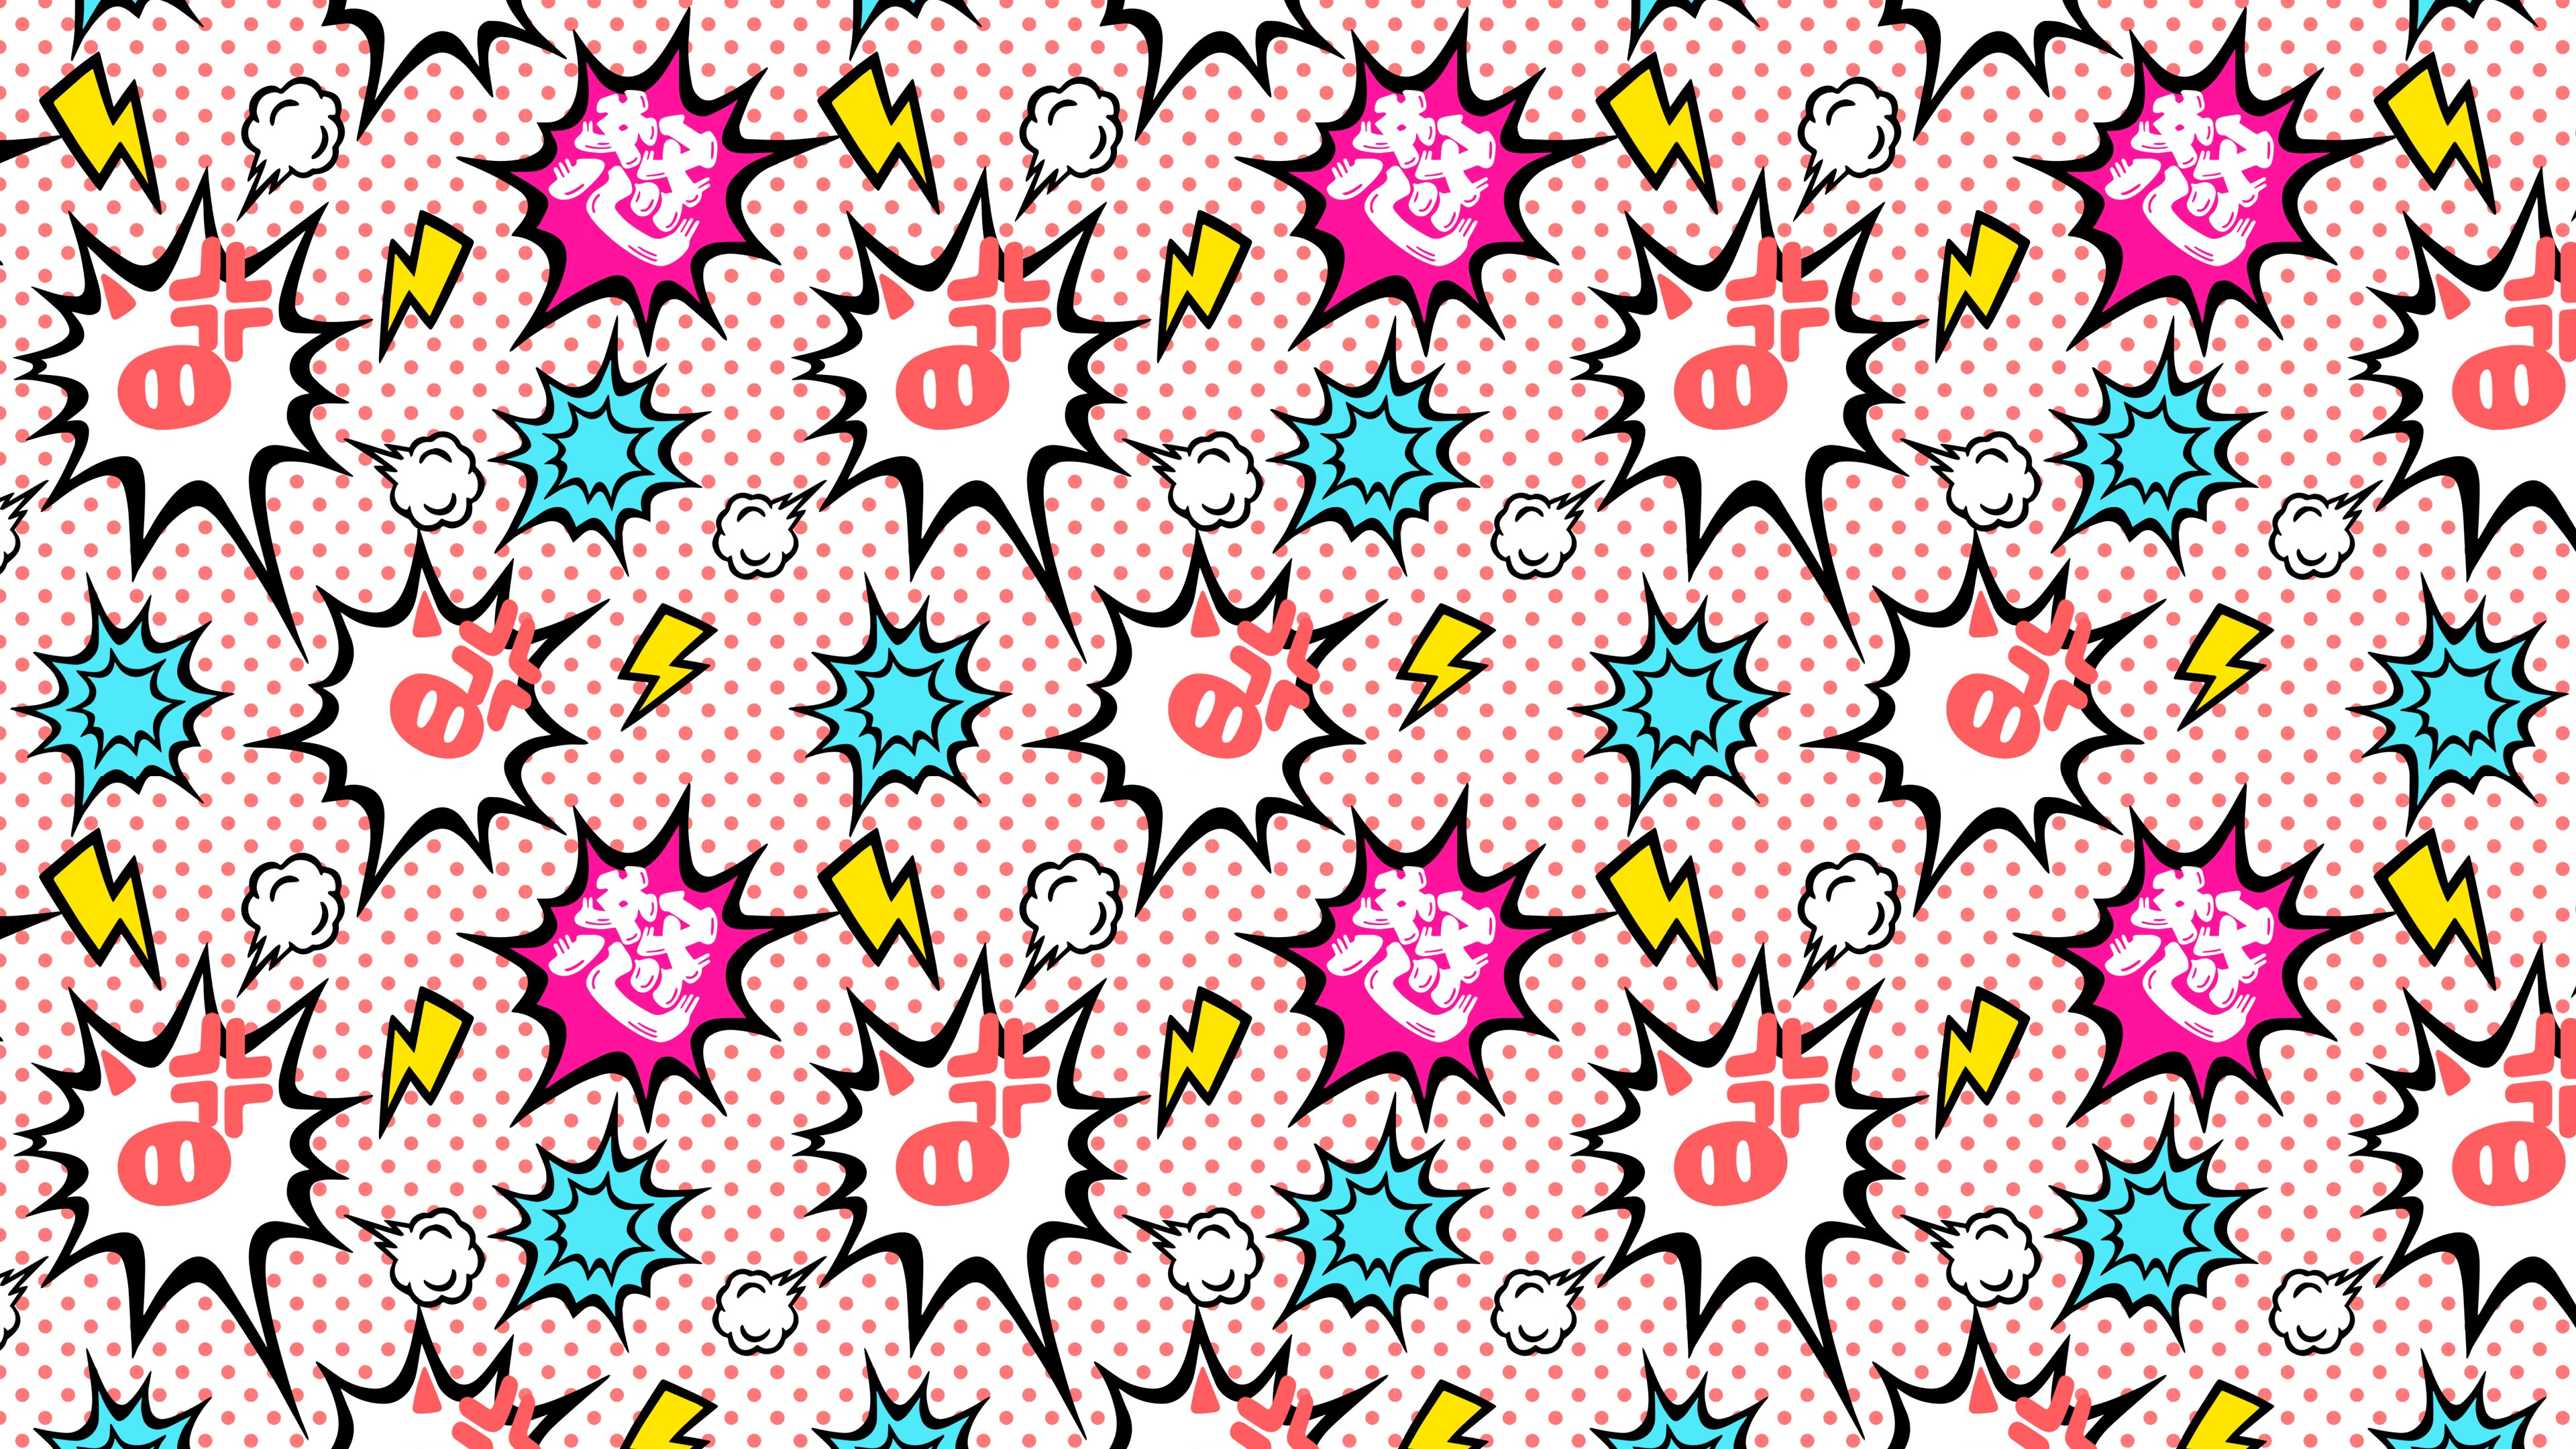 General 3840x2160 Pokémon pattern abstract polka dots simple background